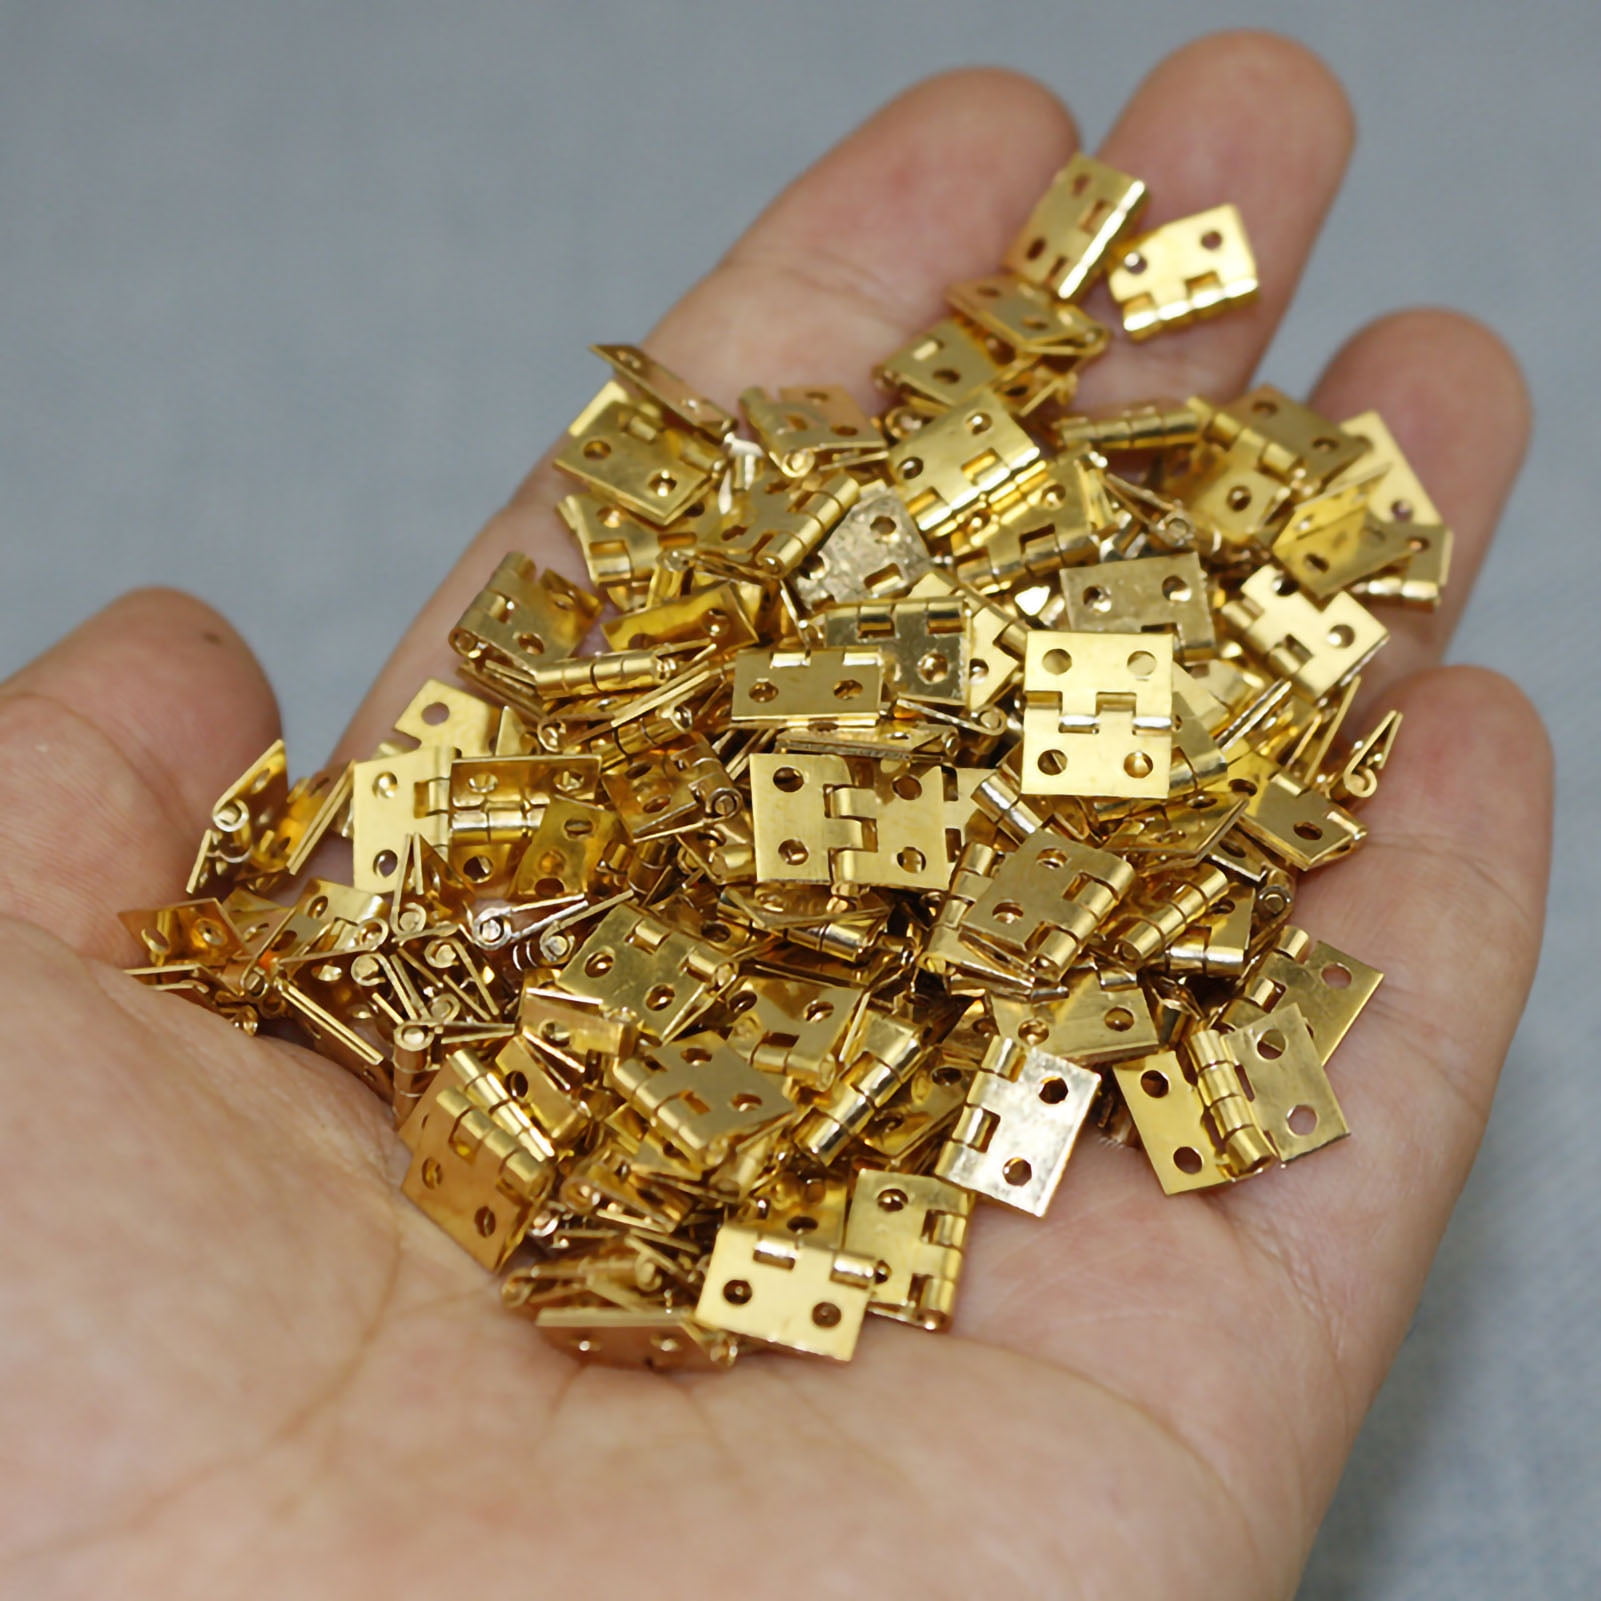 20Pcs Brass Hinges 1/4in 4 Hole Folding Small Hinge With Screws For Doll  Houses CabinetsGold 